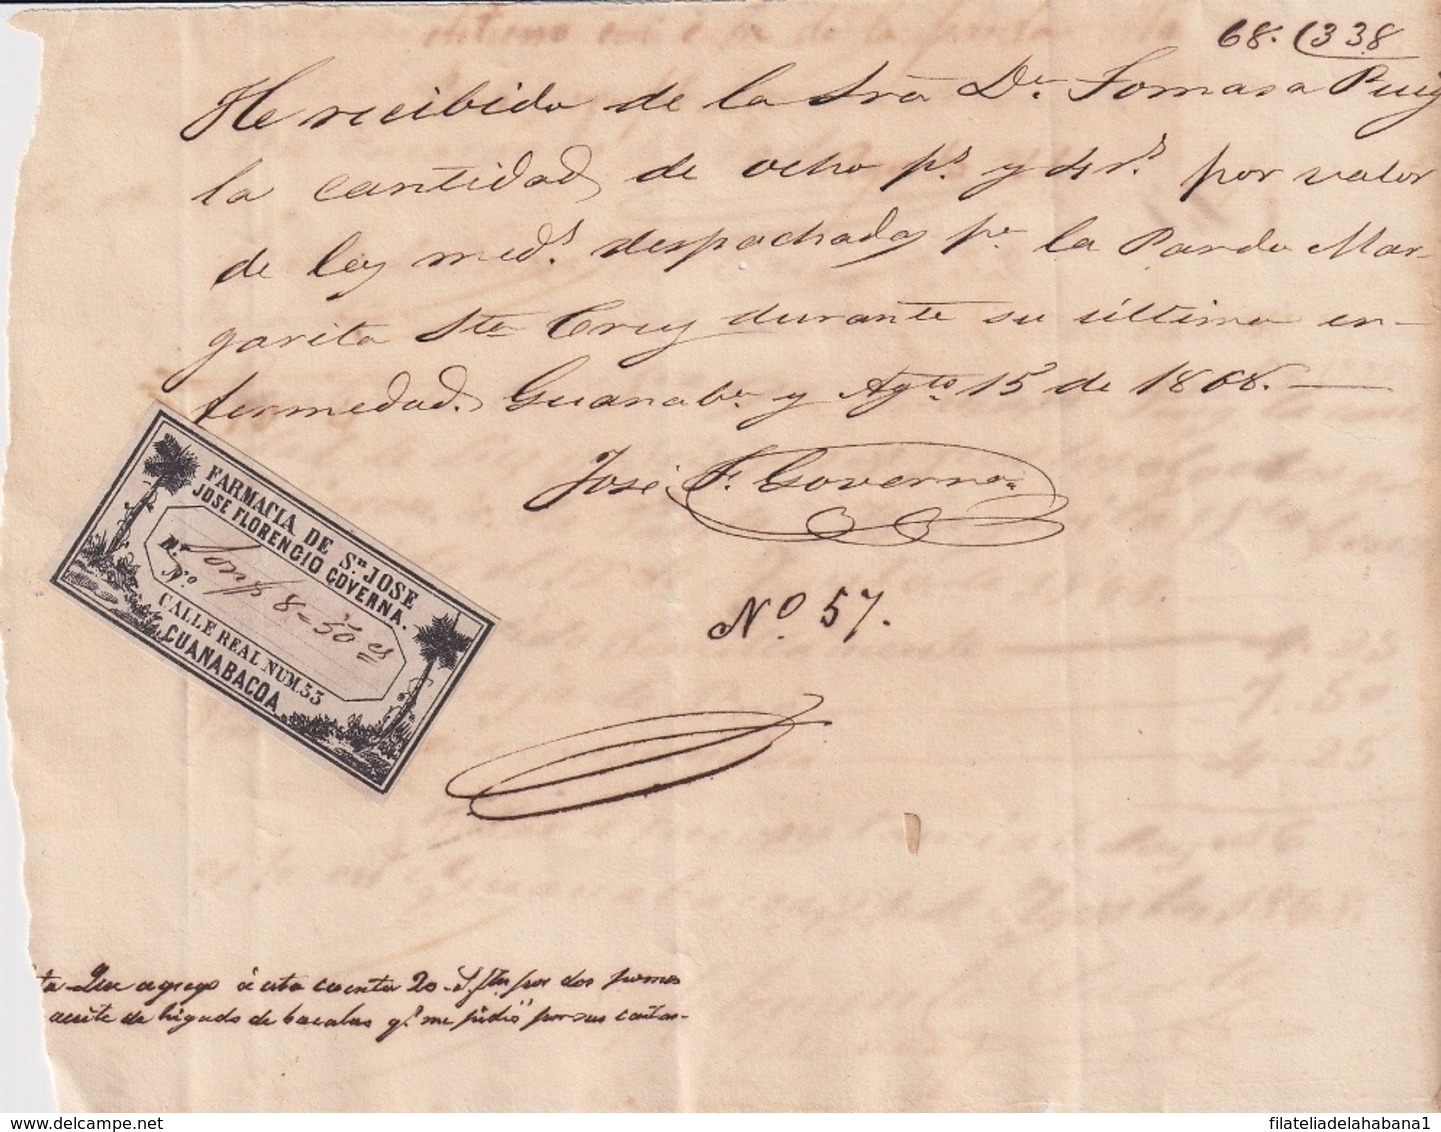 E6365 CUBA SPAIN 1868 GUANABACOA SAN JOSE PHARMACY DRUG STORE INVOICE WITH CINDERELLA. - Historical Documents